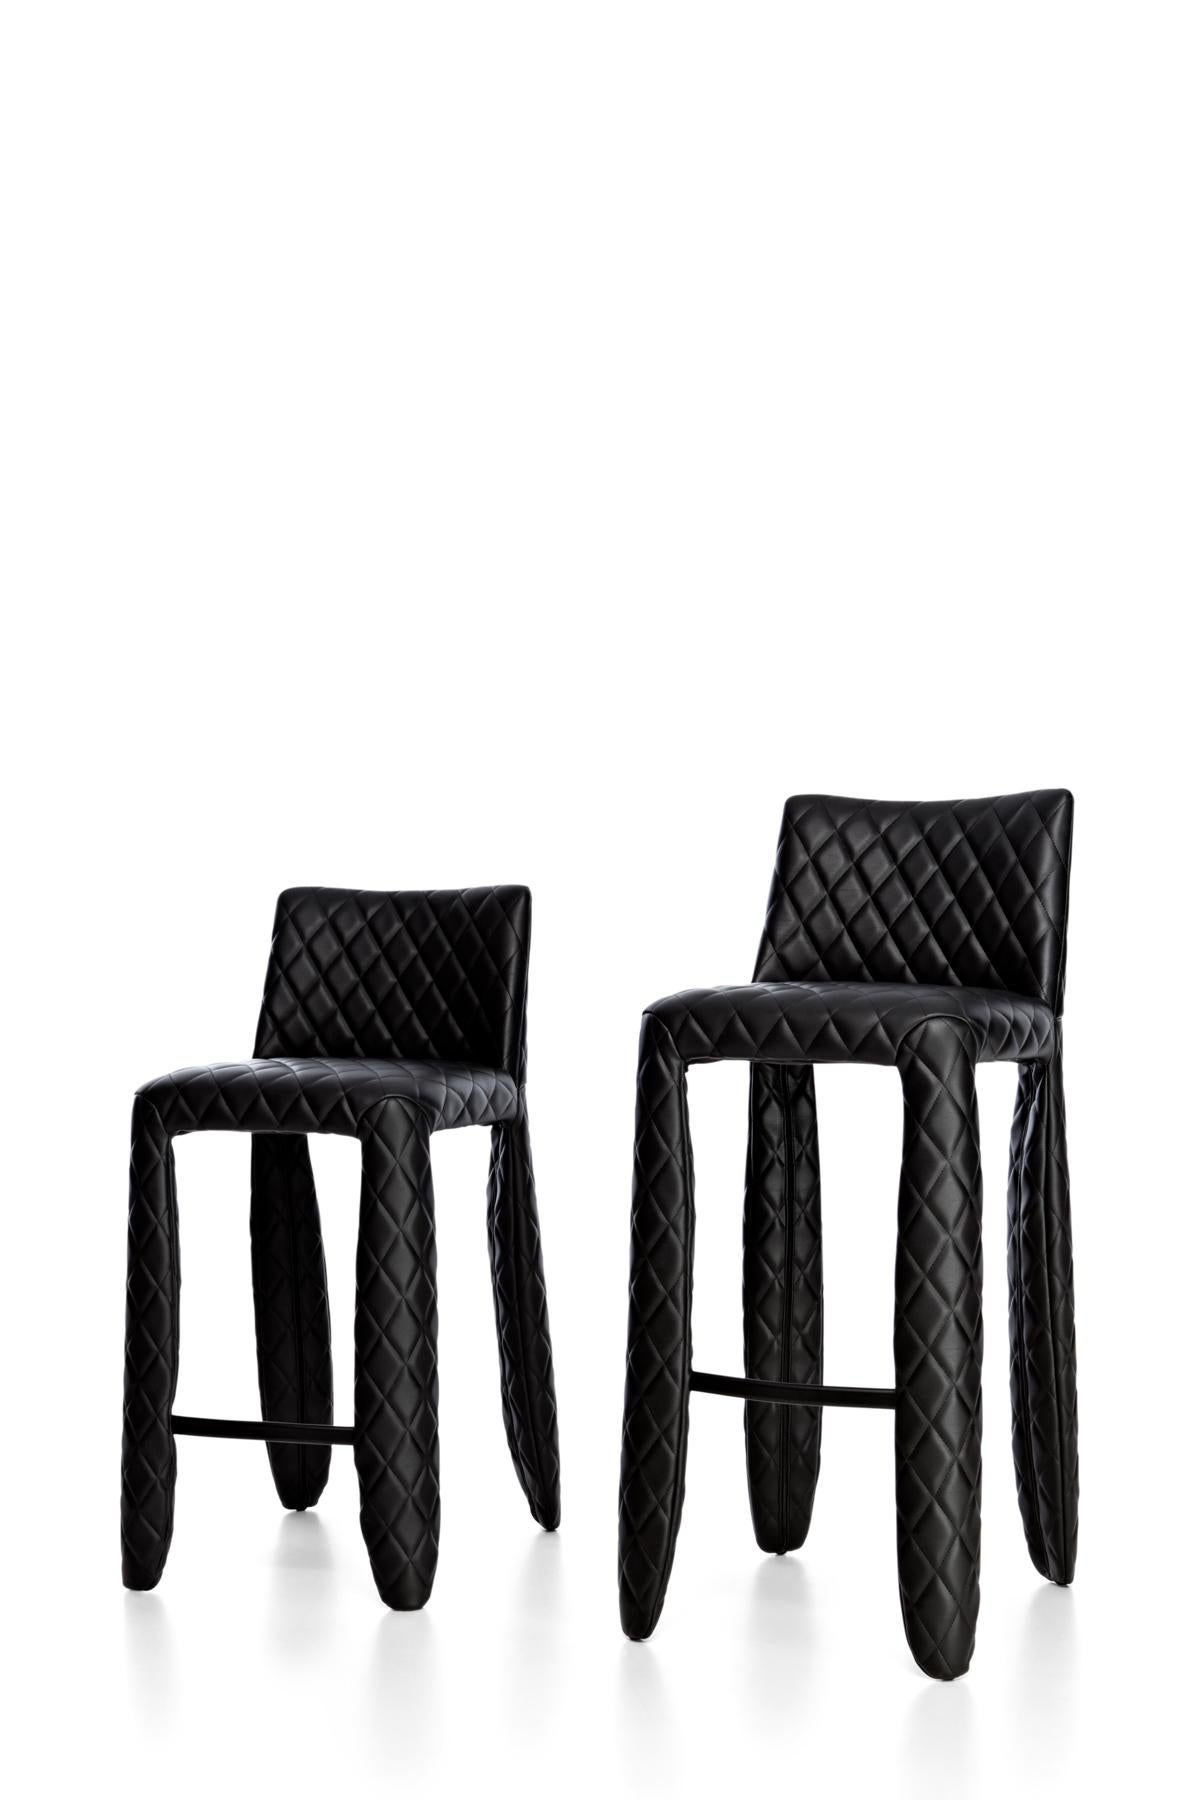 A soft, puffy and stylish barstool as symbol of the eternal battle between opposite forces that take place in life and can be easily recognized inside ourselves, if we have the courage to open our eyes. Scary? Not at all! You forget all about the